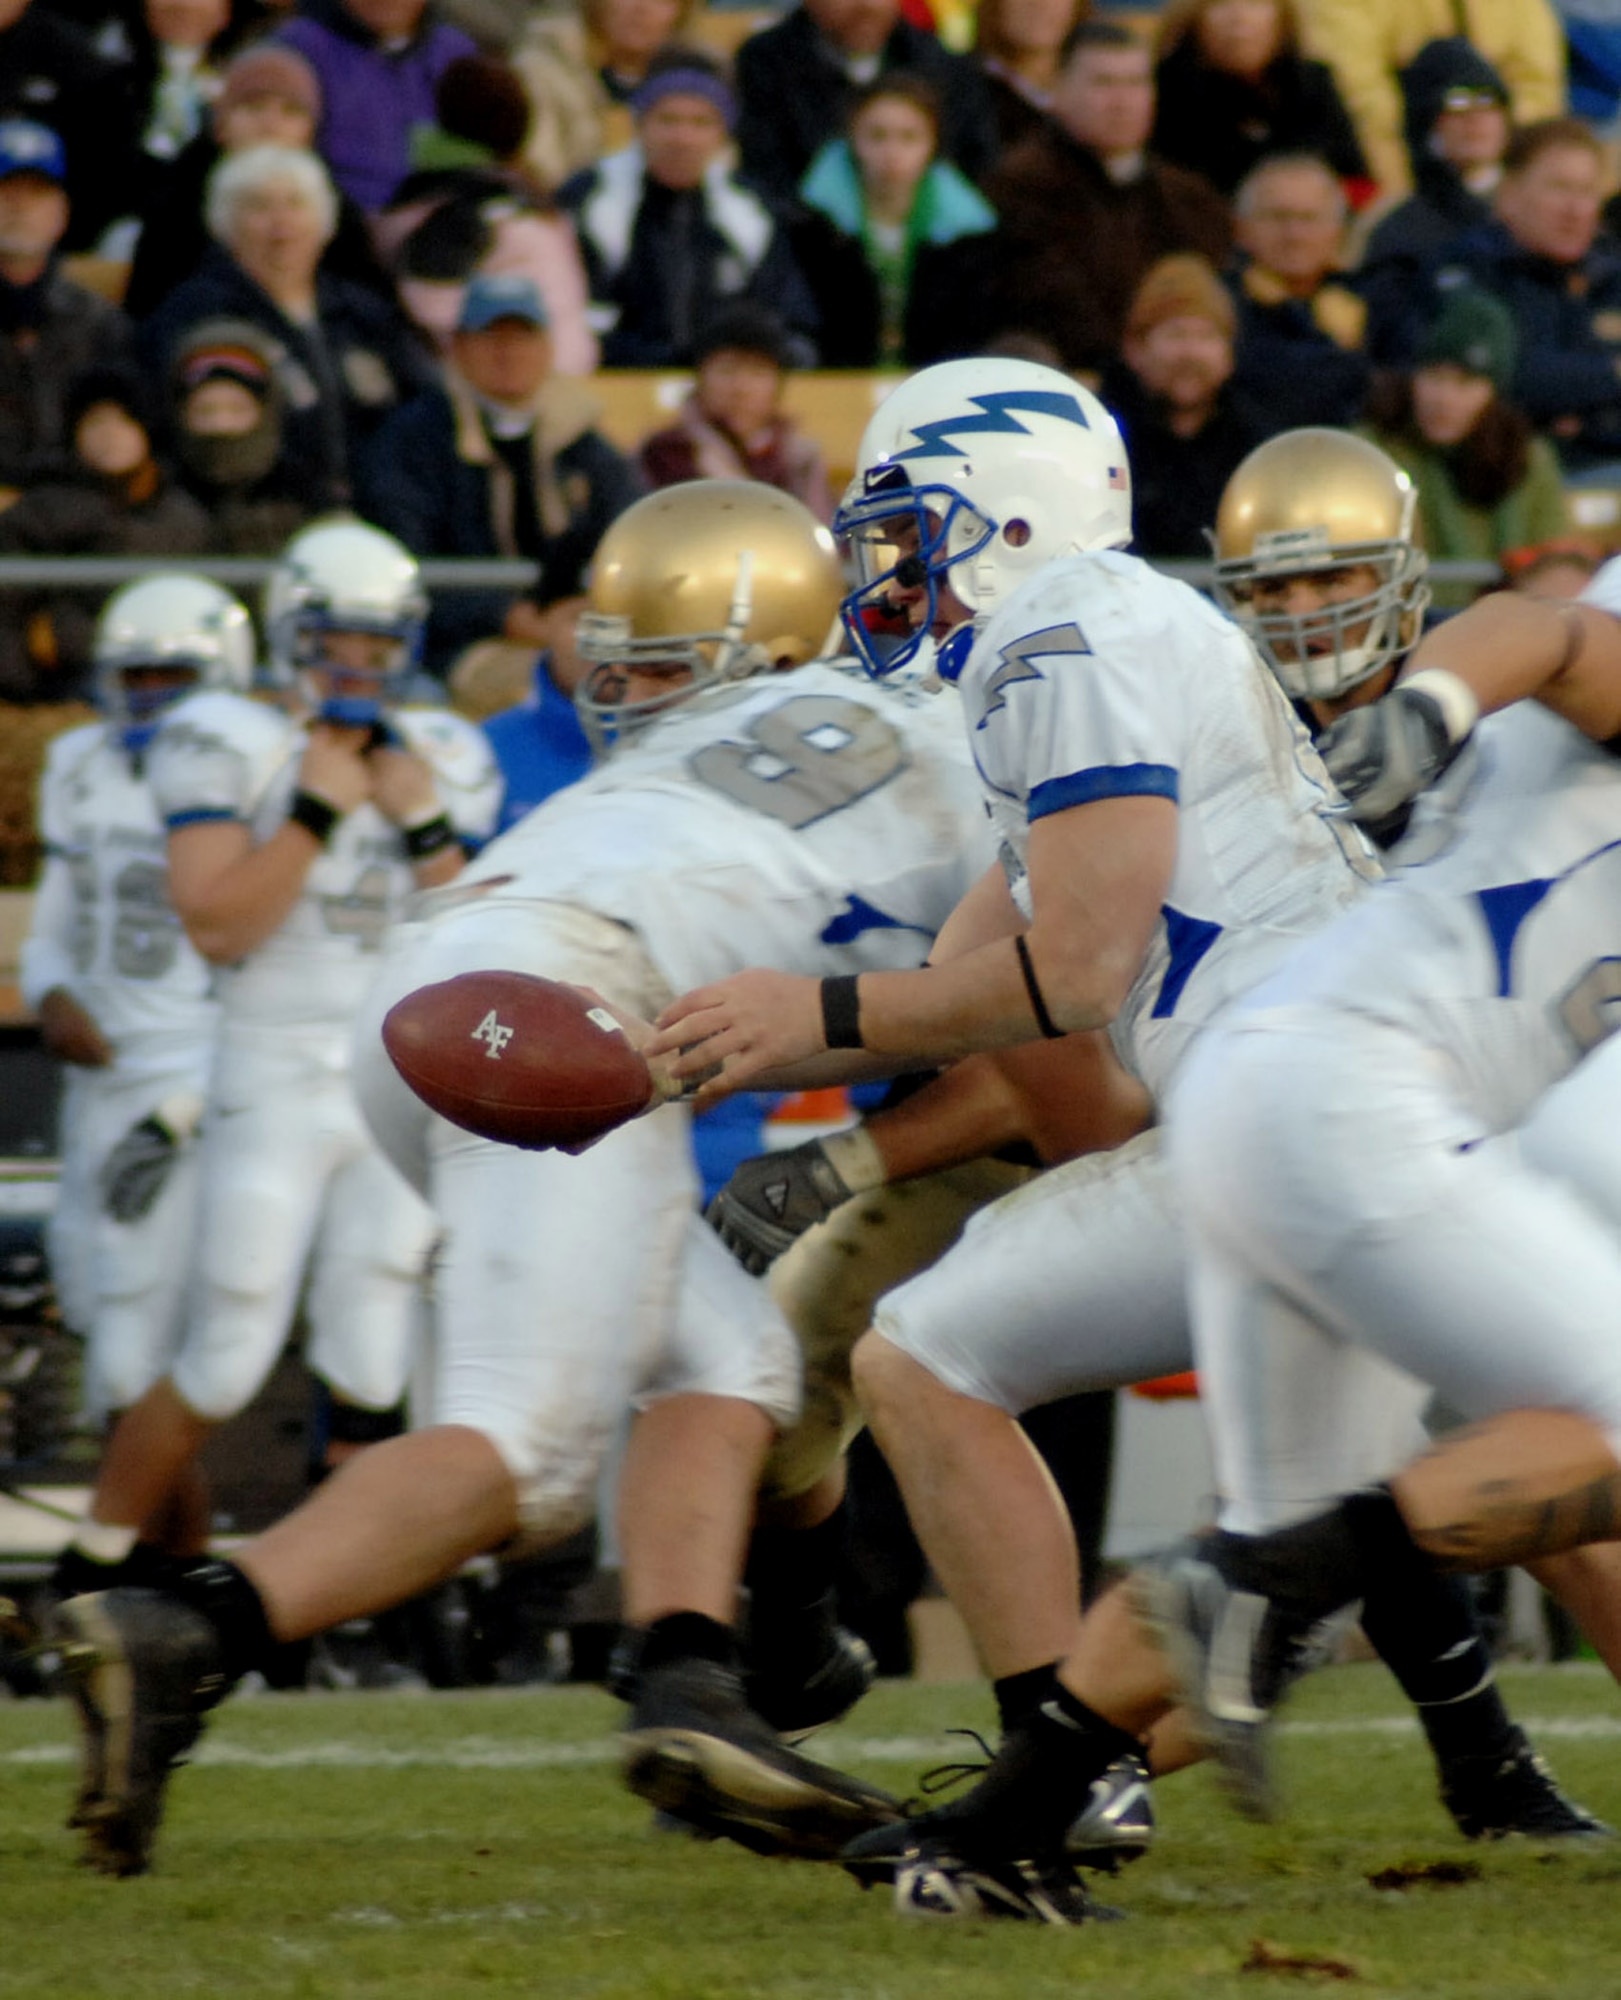 U.S. Air Force Academy Falcons quarterback Shaun Carney looks to hand off the ball in the Falcons' 41-24 victory over Notre Dame Nov. 10 at Notre Dame Stadium in Indiana. (Courtesy photo by Vanessa Gempis) 
